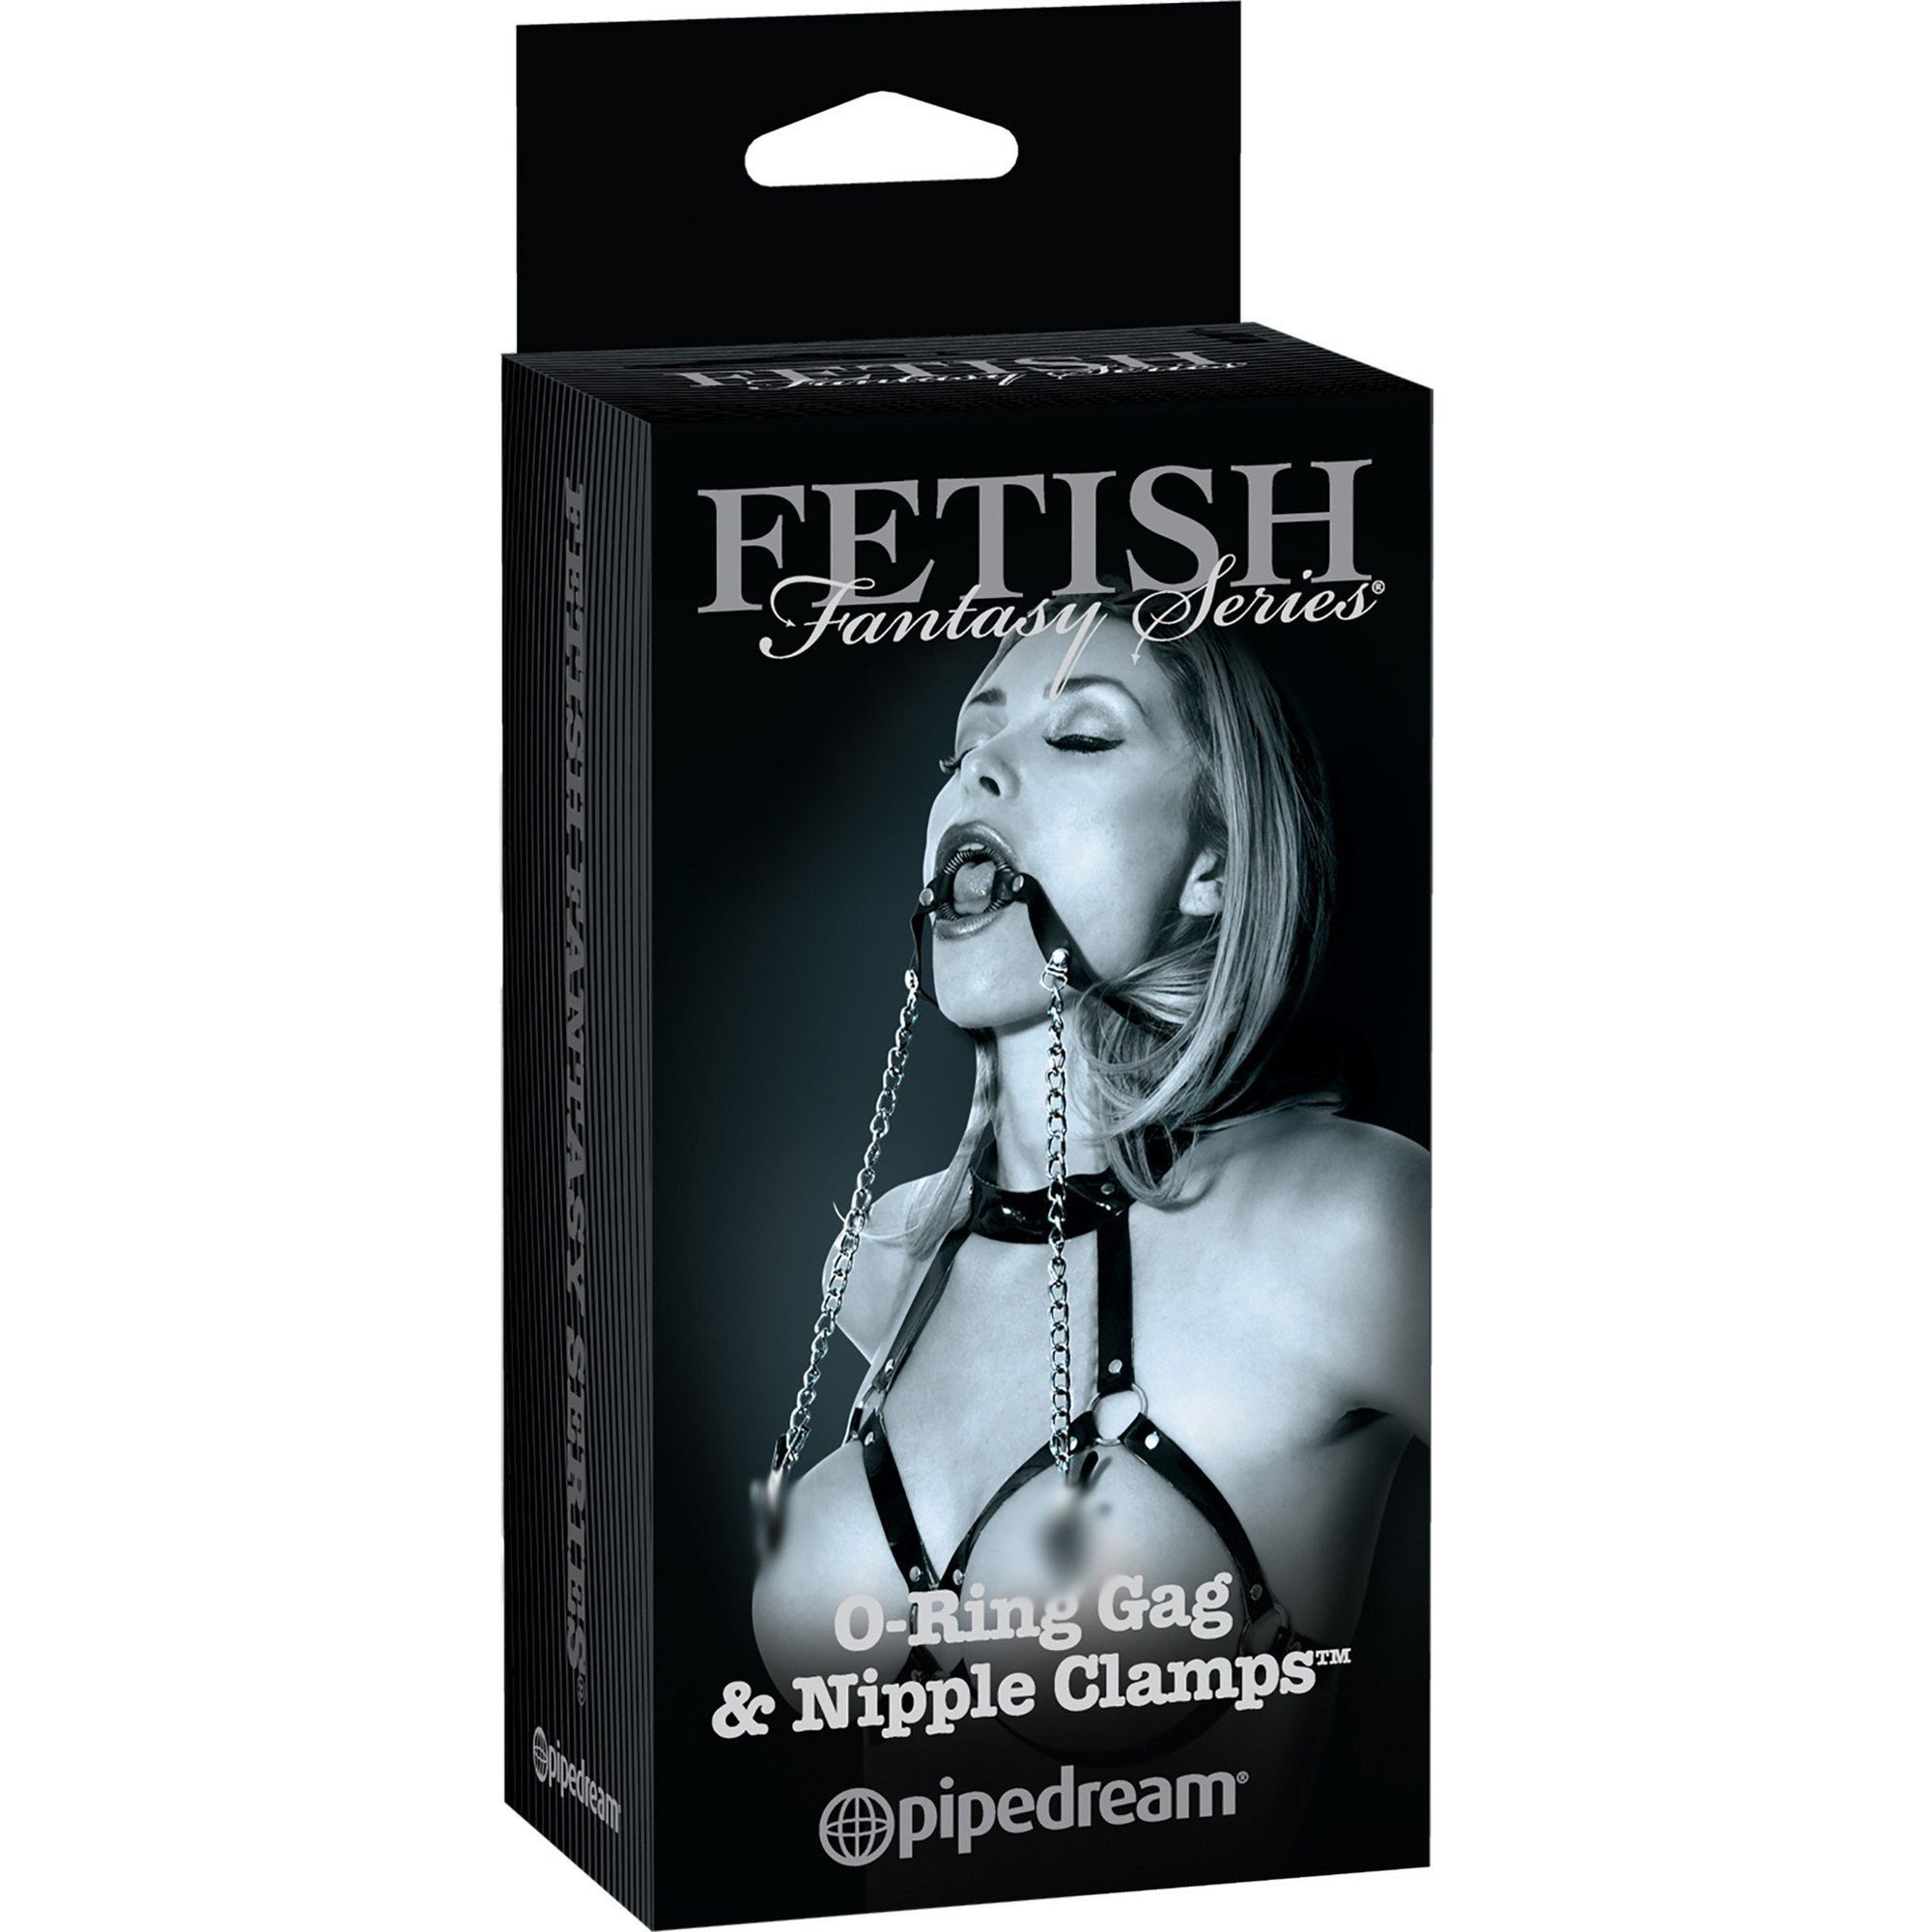 Pipedream - Fetish Fantasy Series Limited Edition O-Ring Gag & Nipple Clamps (Black) Nipple Clamps (Non Vibration) - CherryAffairs Singapore